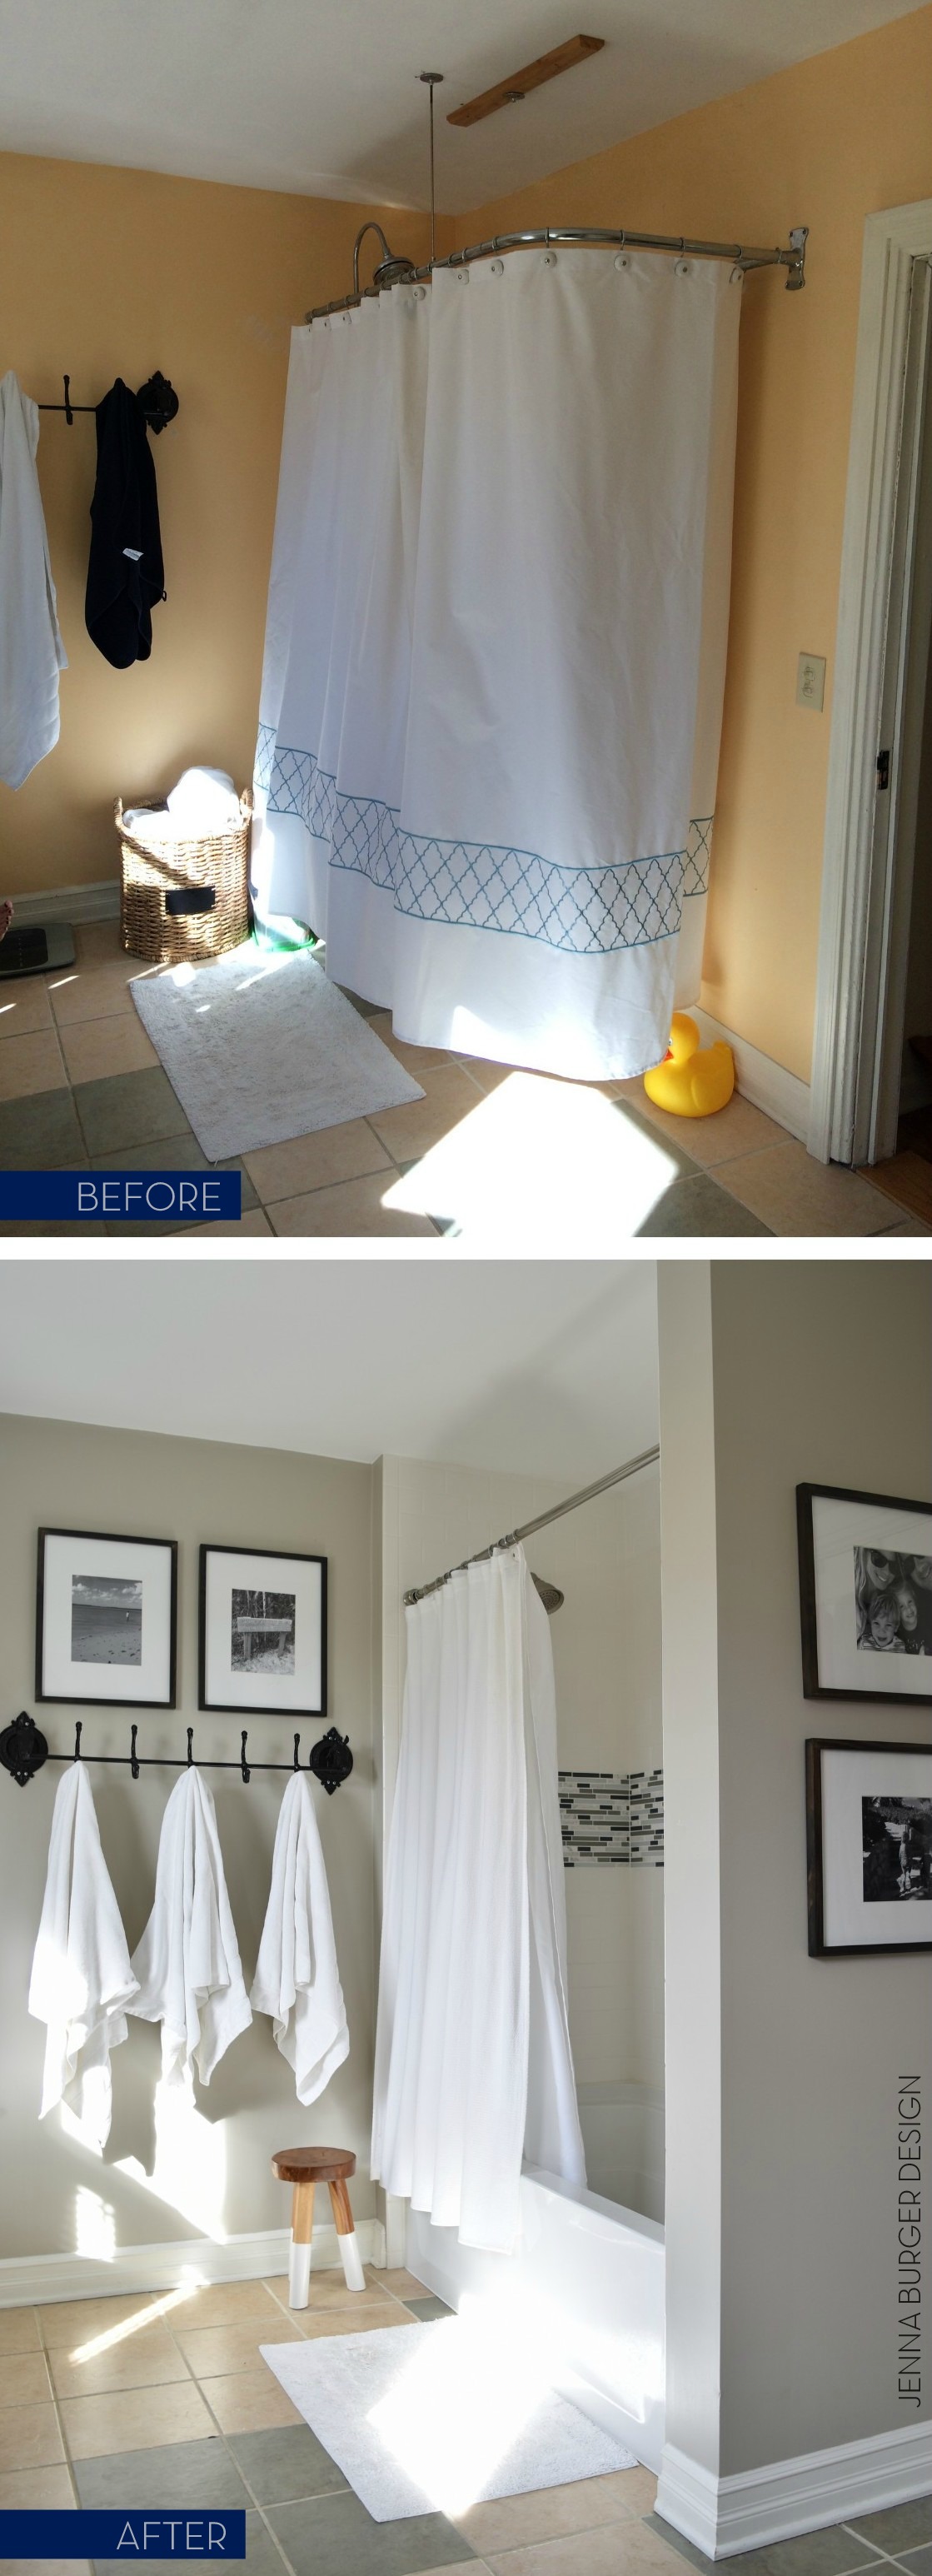 Budget BATHROOM RENOVATION Reveal: Before + After of this cool-toned cottage style bathroom by www.JennaBurger.com